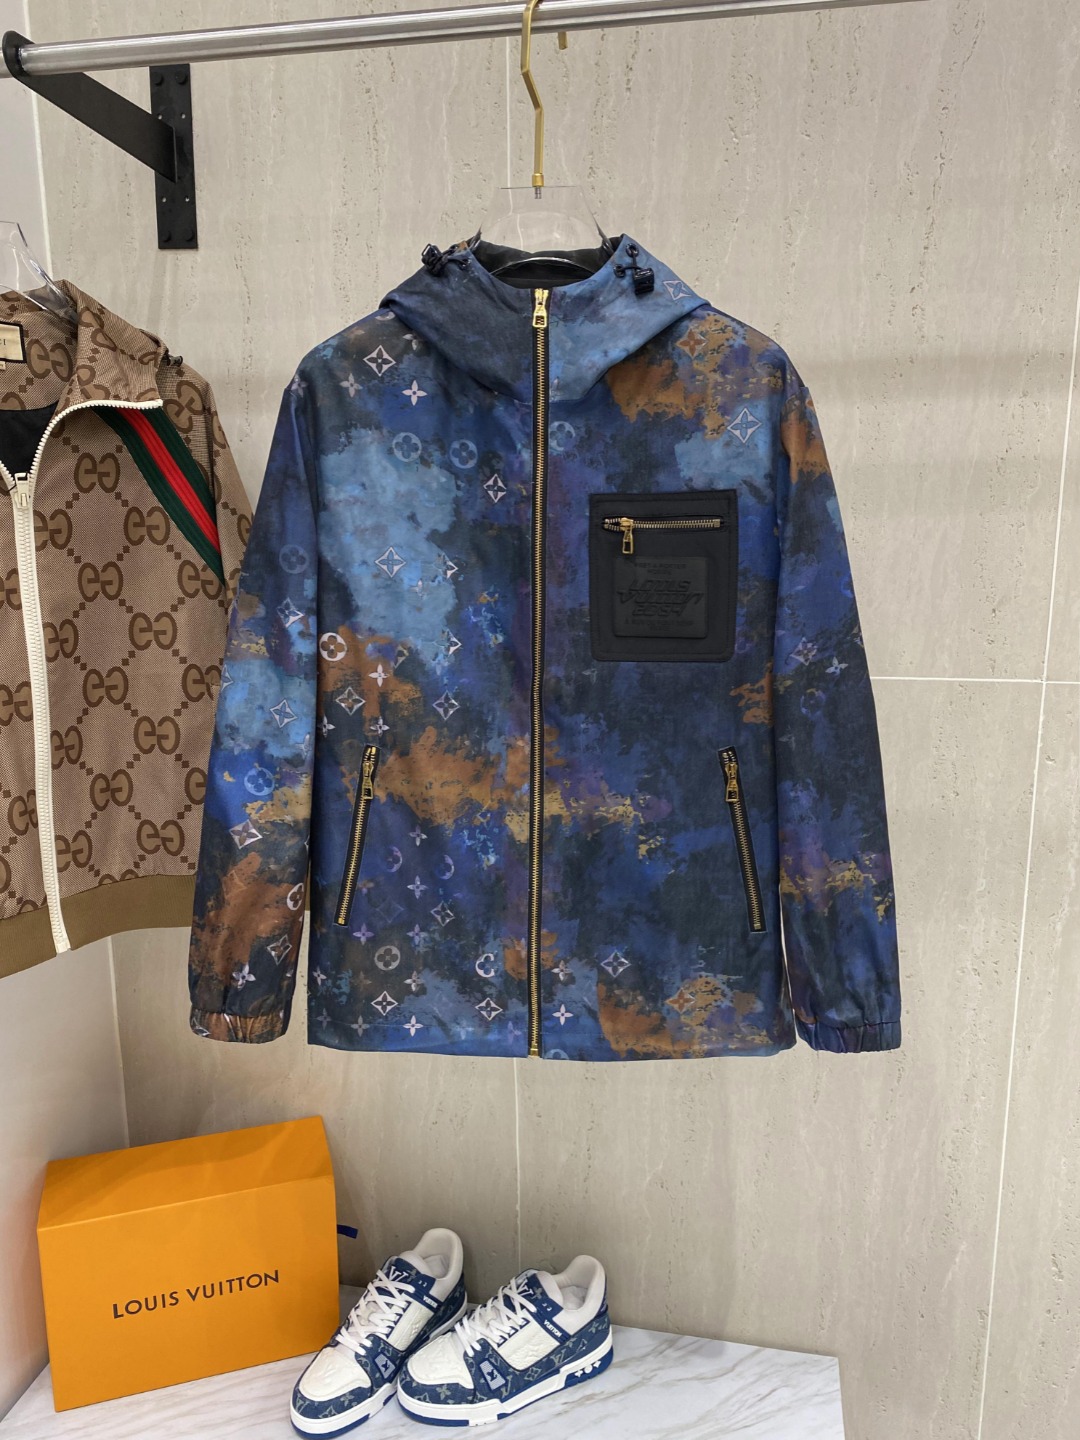 How to start selling replica
 Louis Vuitton Clothing Coats & Jackets Practical And Versatile Replica Designer
 Black Blue Navy Silver Printing Men Cotton Denim Spring/Summer Collection Casual